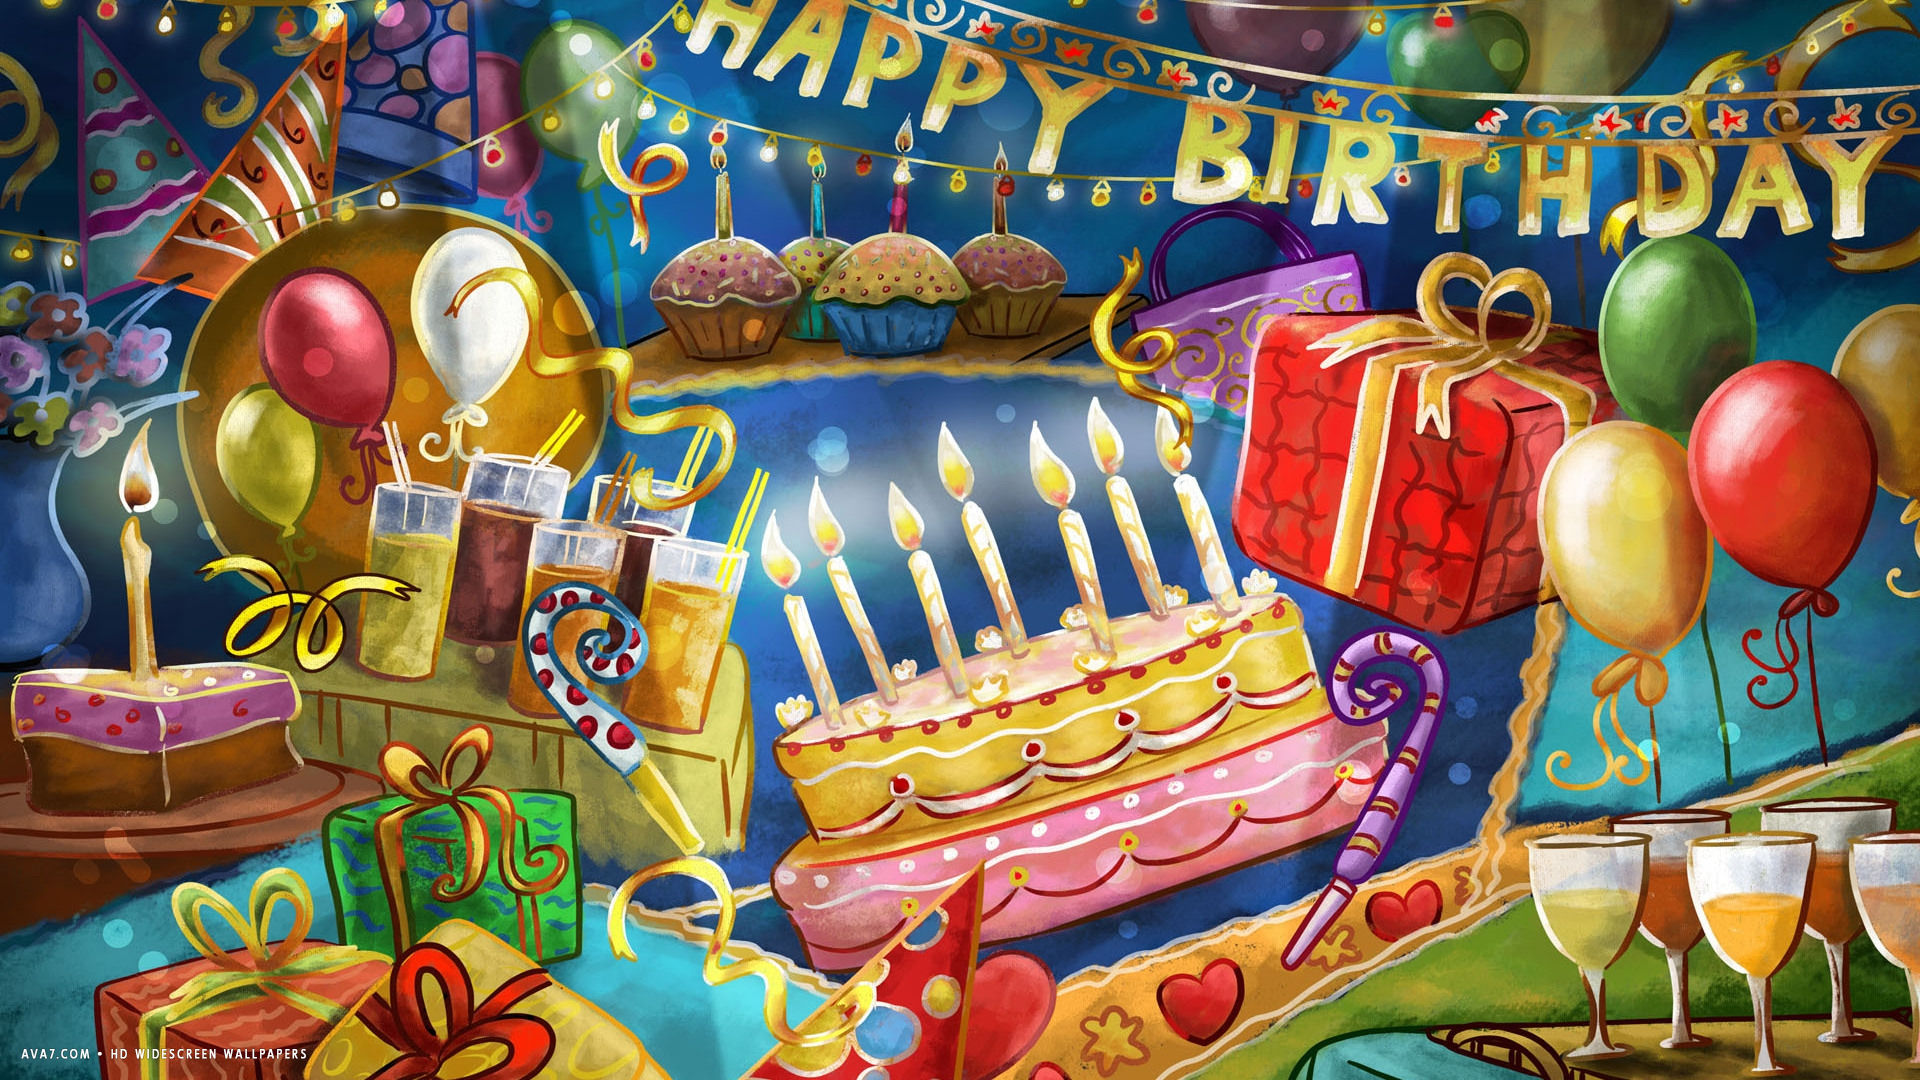 happy-birthday-party-cake-candles-confetti-balloons-party.jpg